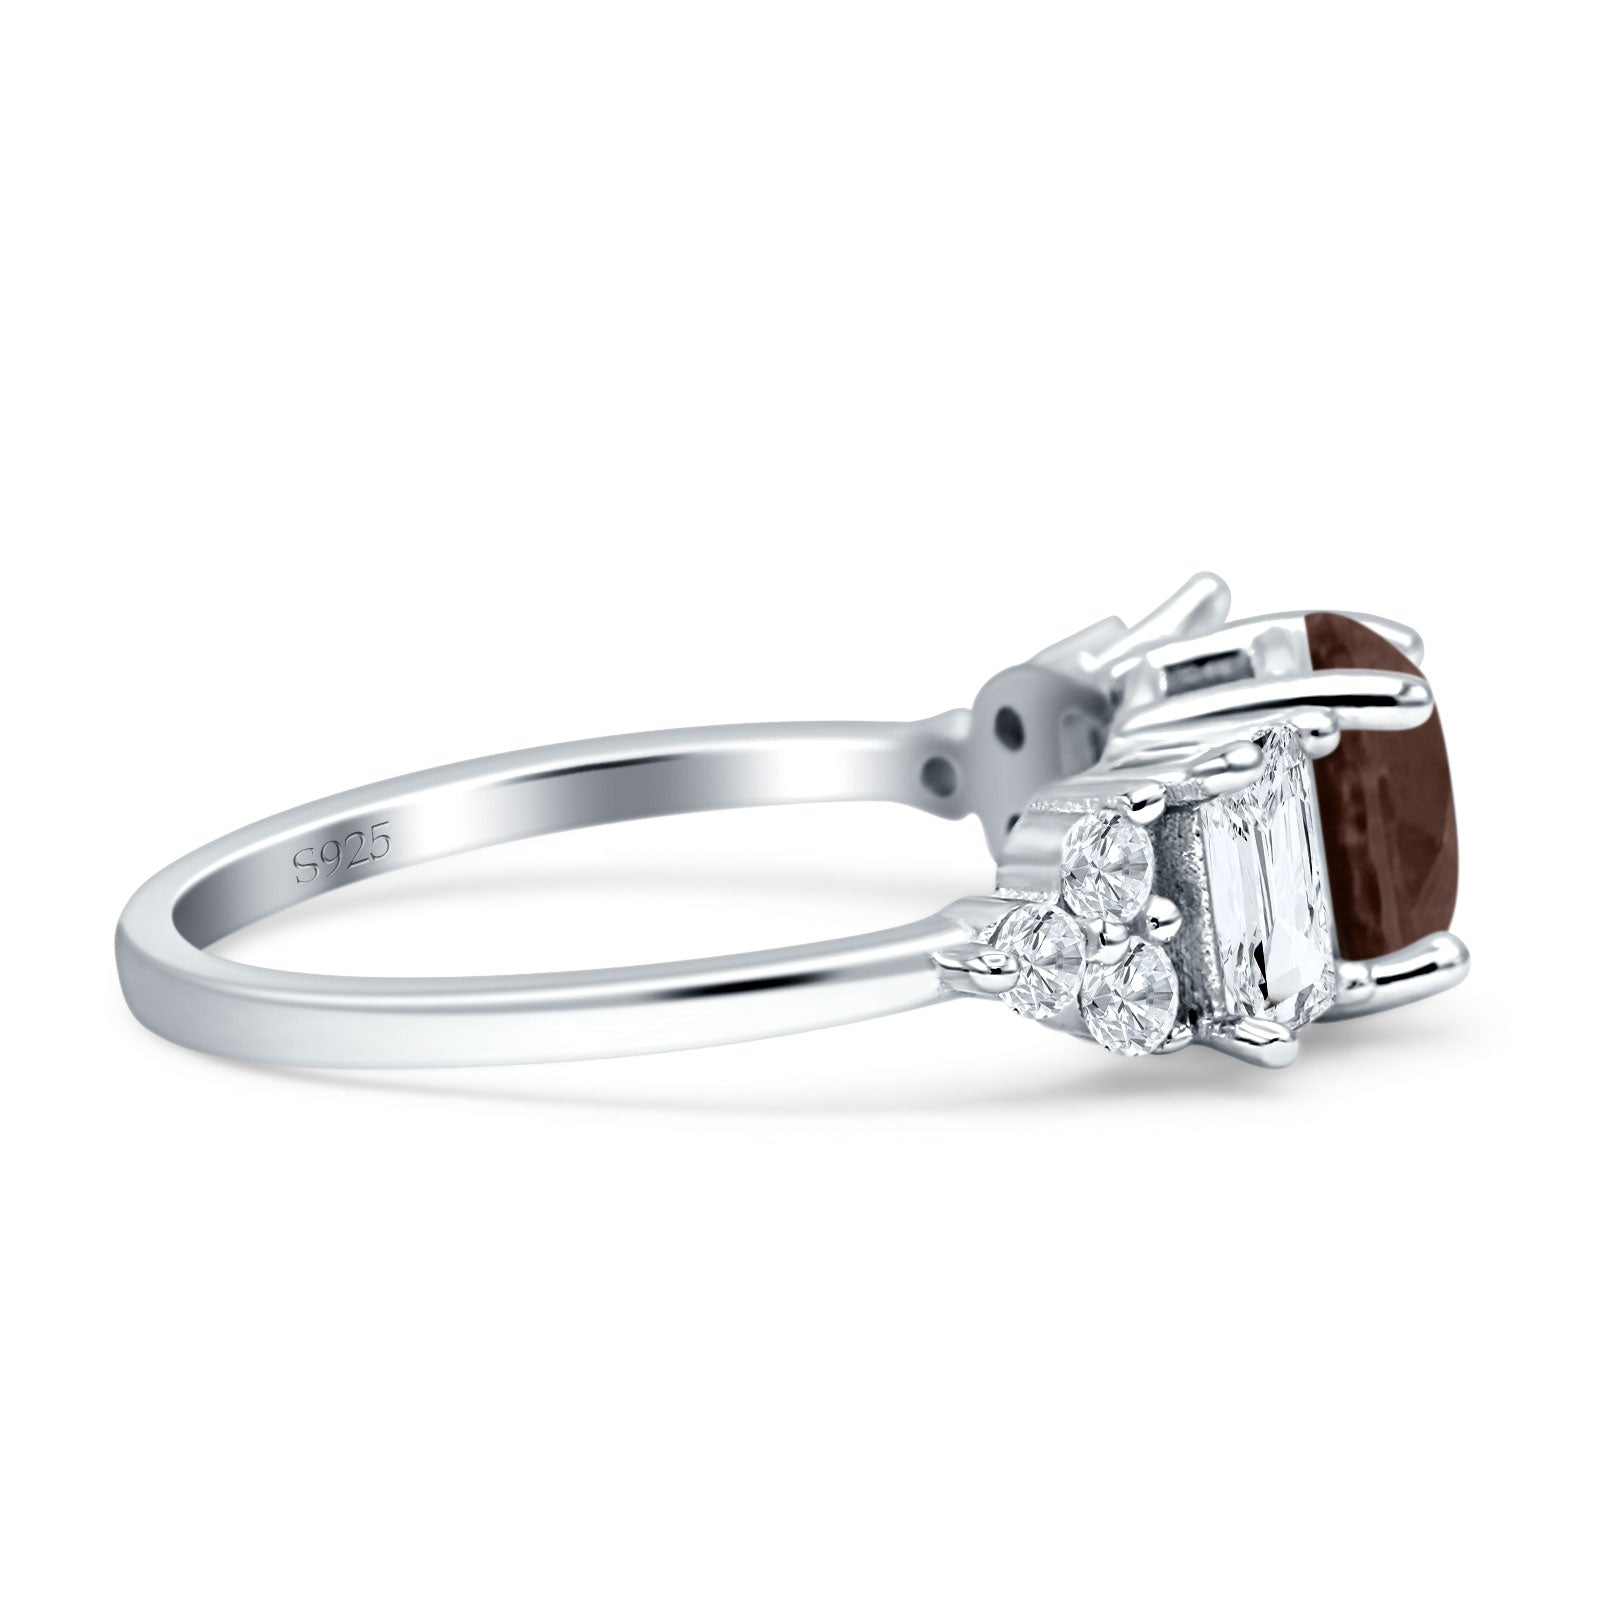 Three Stone Round Natural Chocolate Smoky Quartz Vintage Style Ring 925 Sterling Silver